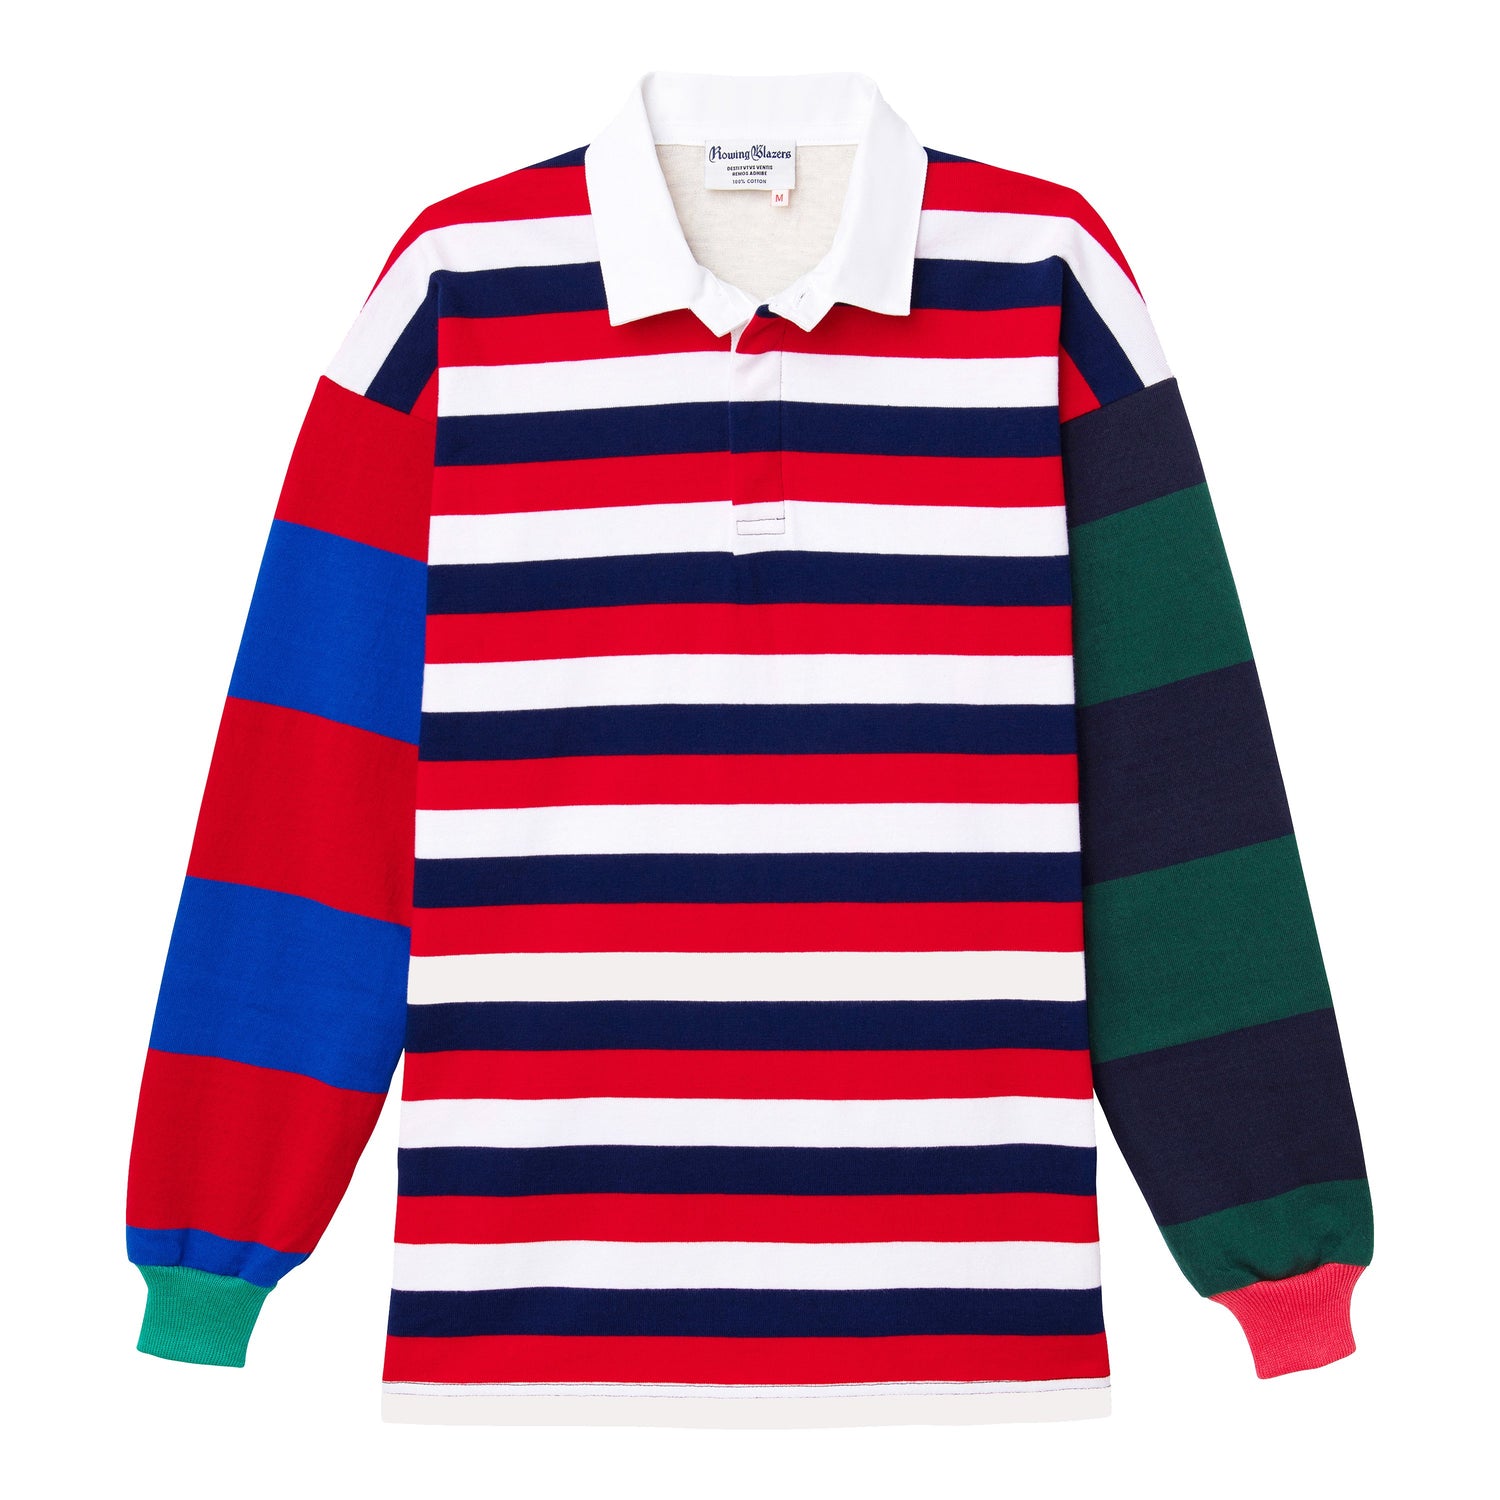 One-of-one striped rugby shirt made from leftover fabric. Red, white, and blue body and mismatched sleeves. Each is unique.